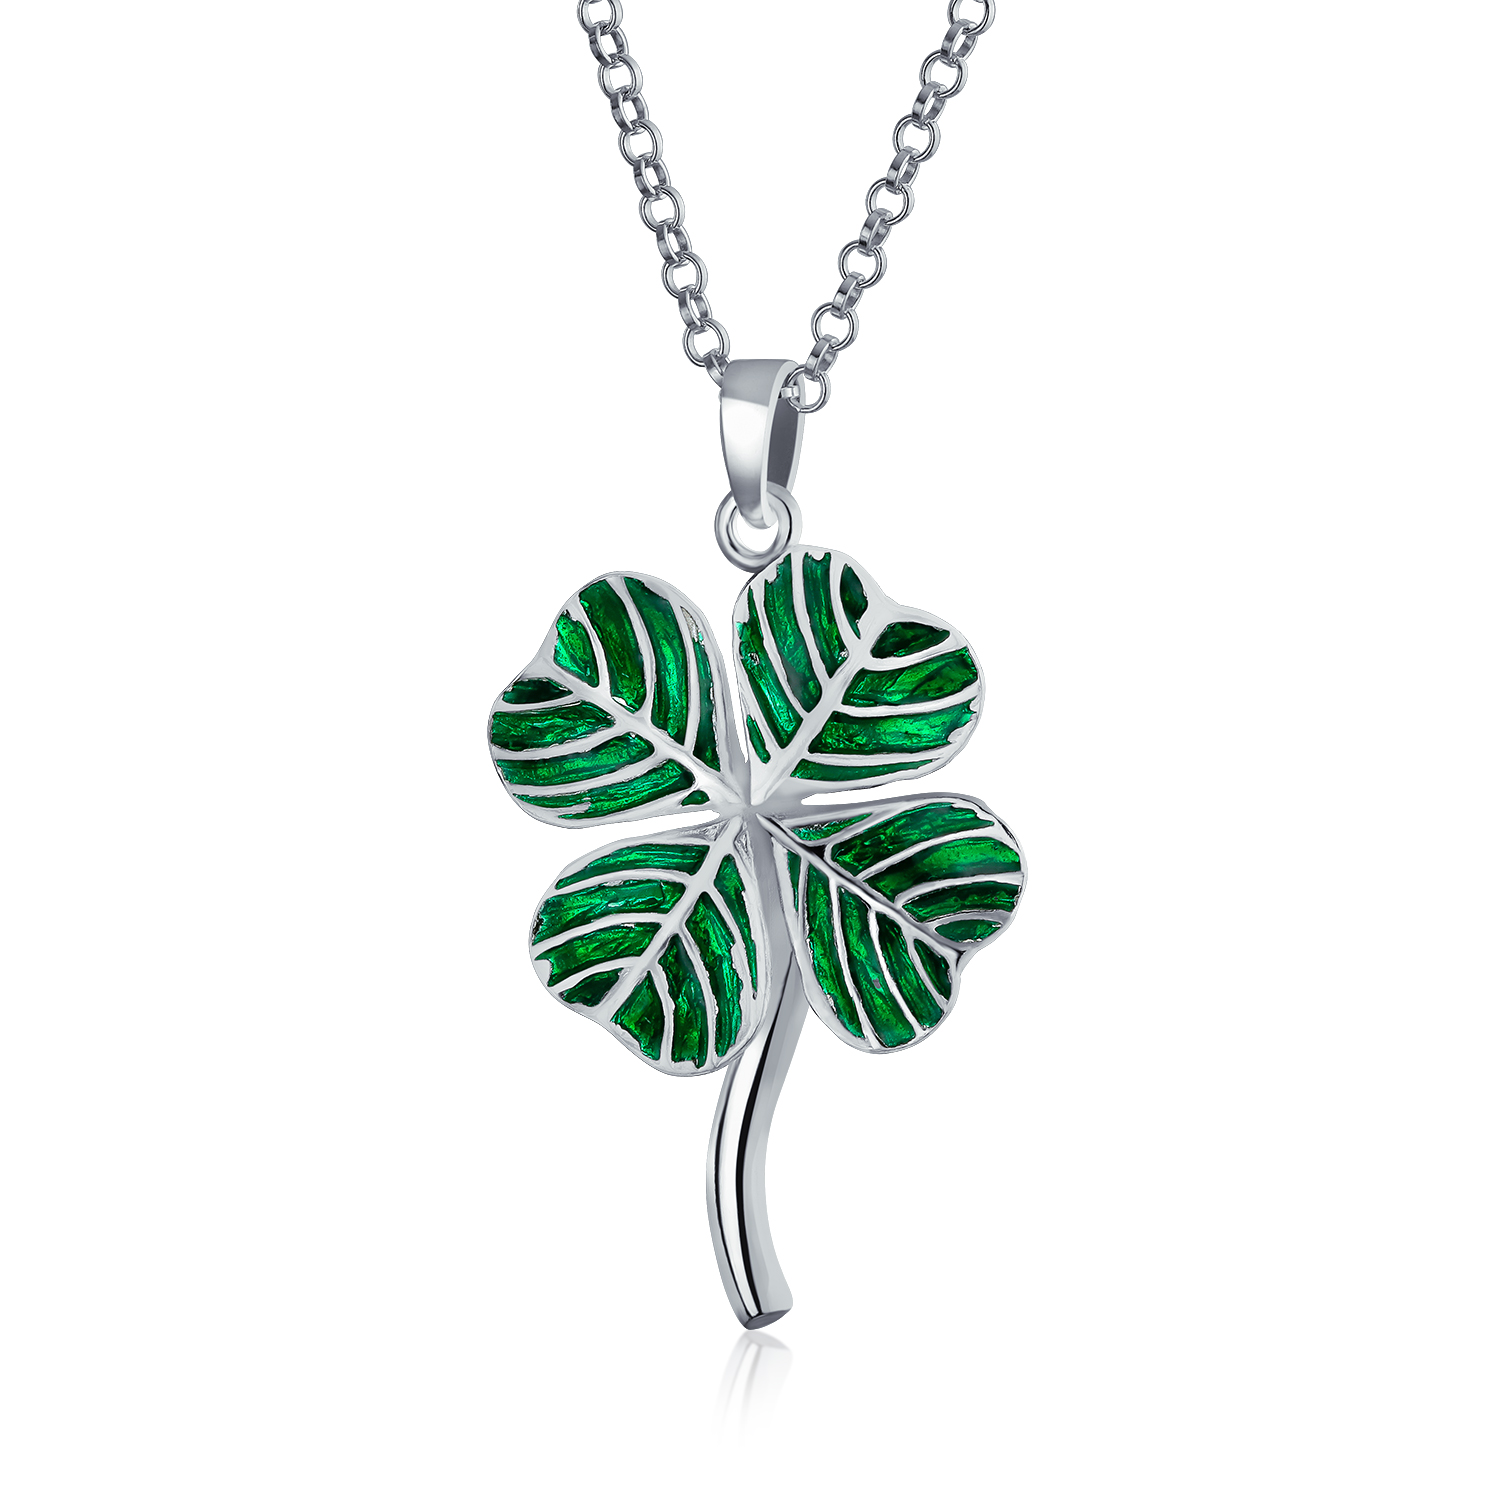 Show Goat Goat and Four Leaf Clover Necklace 4 Leaf Clover Jewelry